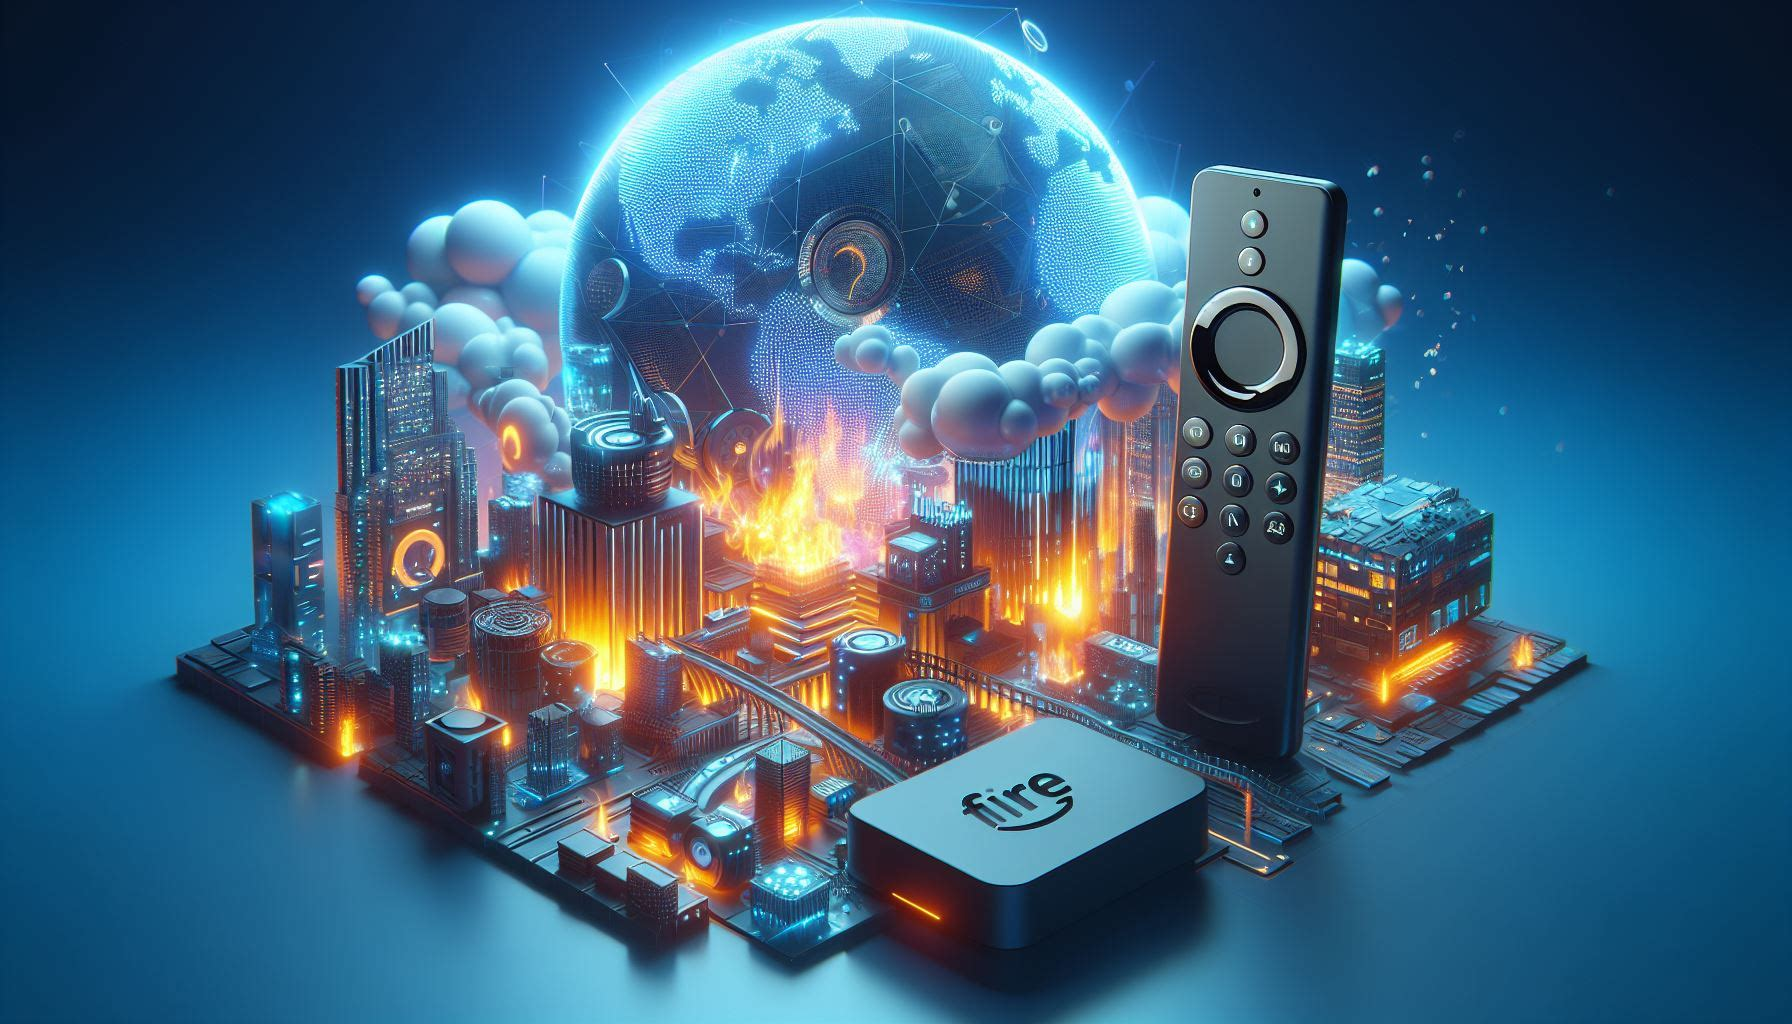 Upgrade Your Streaming Experience with Fire TV Stick 4K!